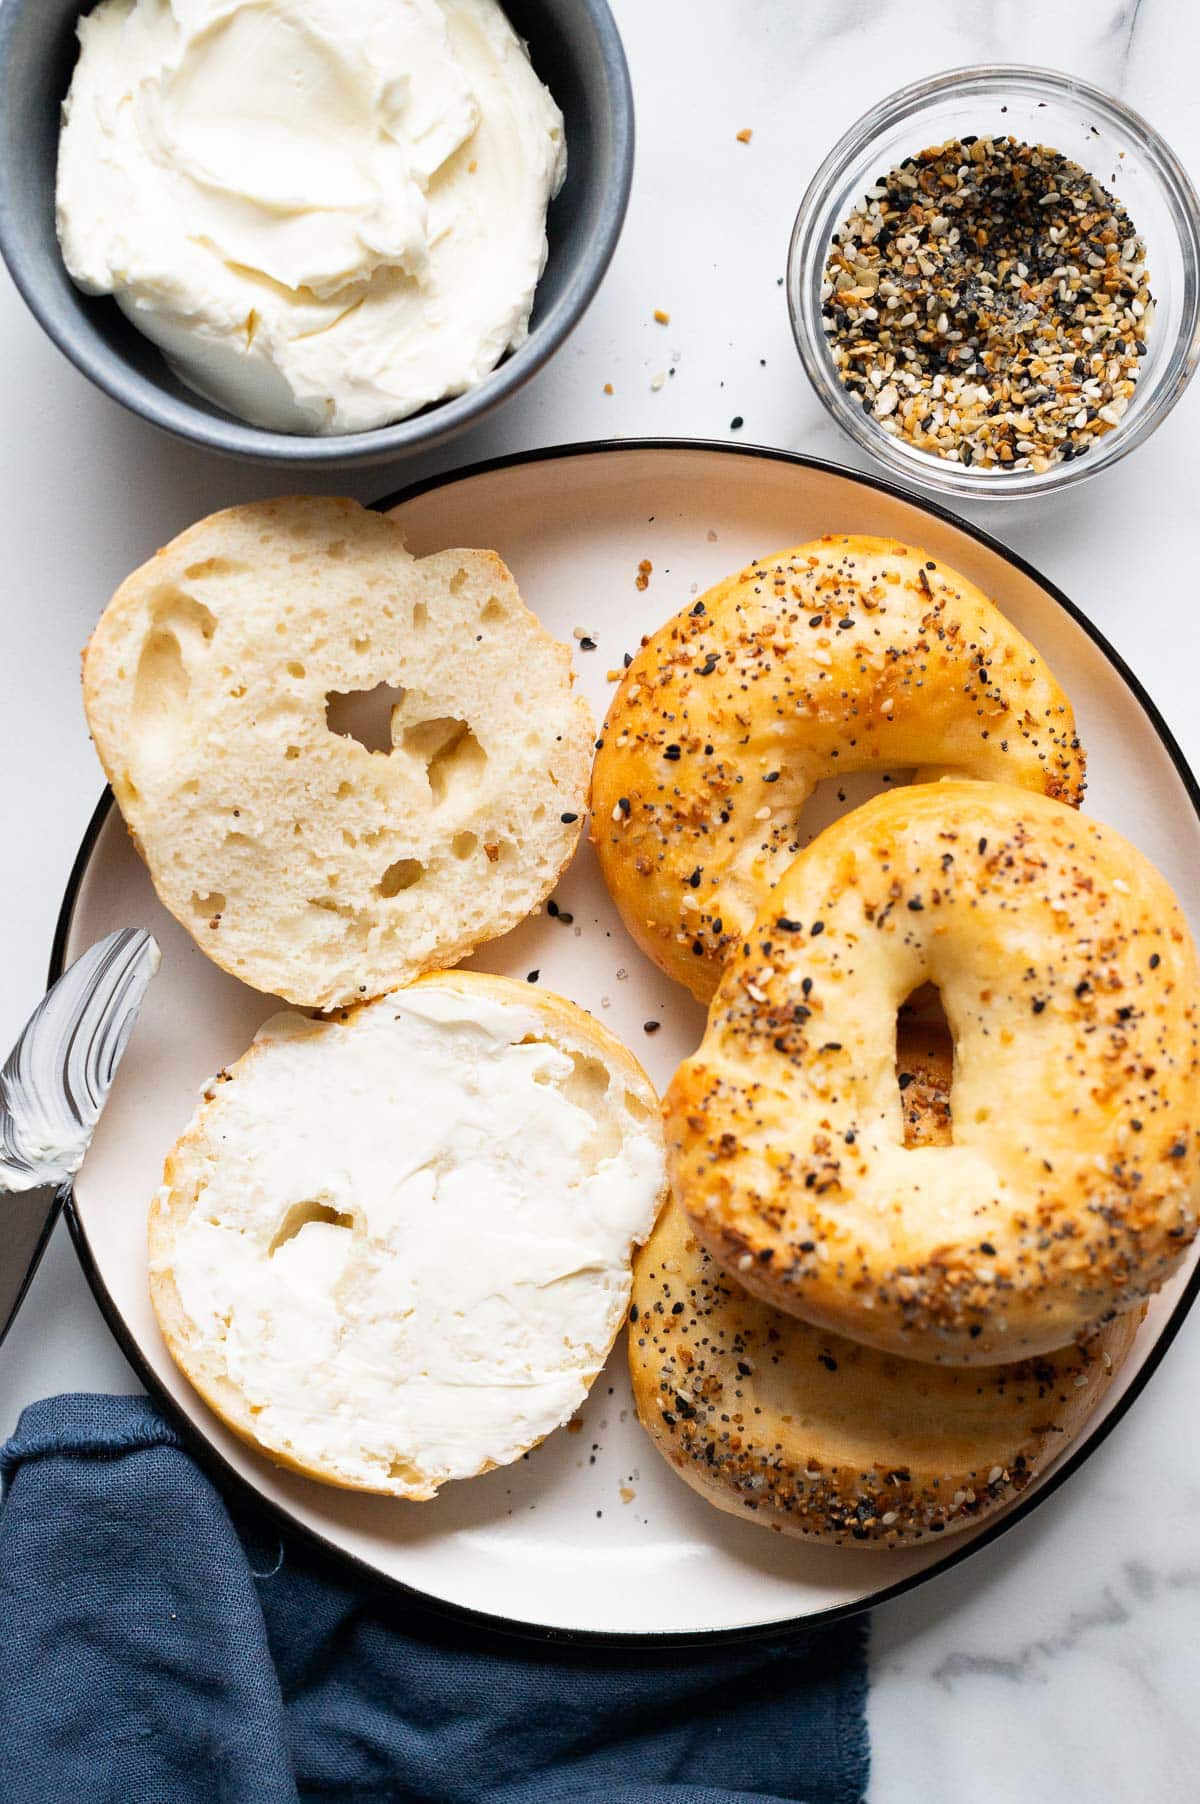 4 Greek yogurt Bagels on a plate 1 sliced and spread with cream cheese. Cream cheese, everything bagel seasoning, knife and napkin on a counter.